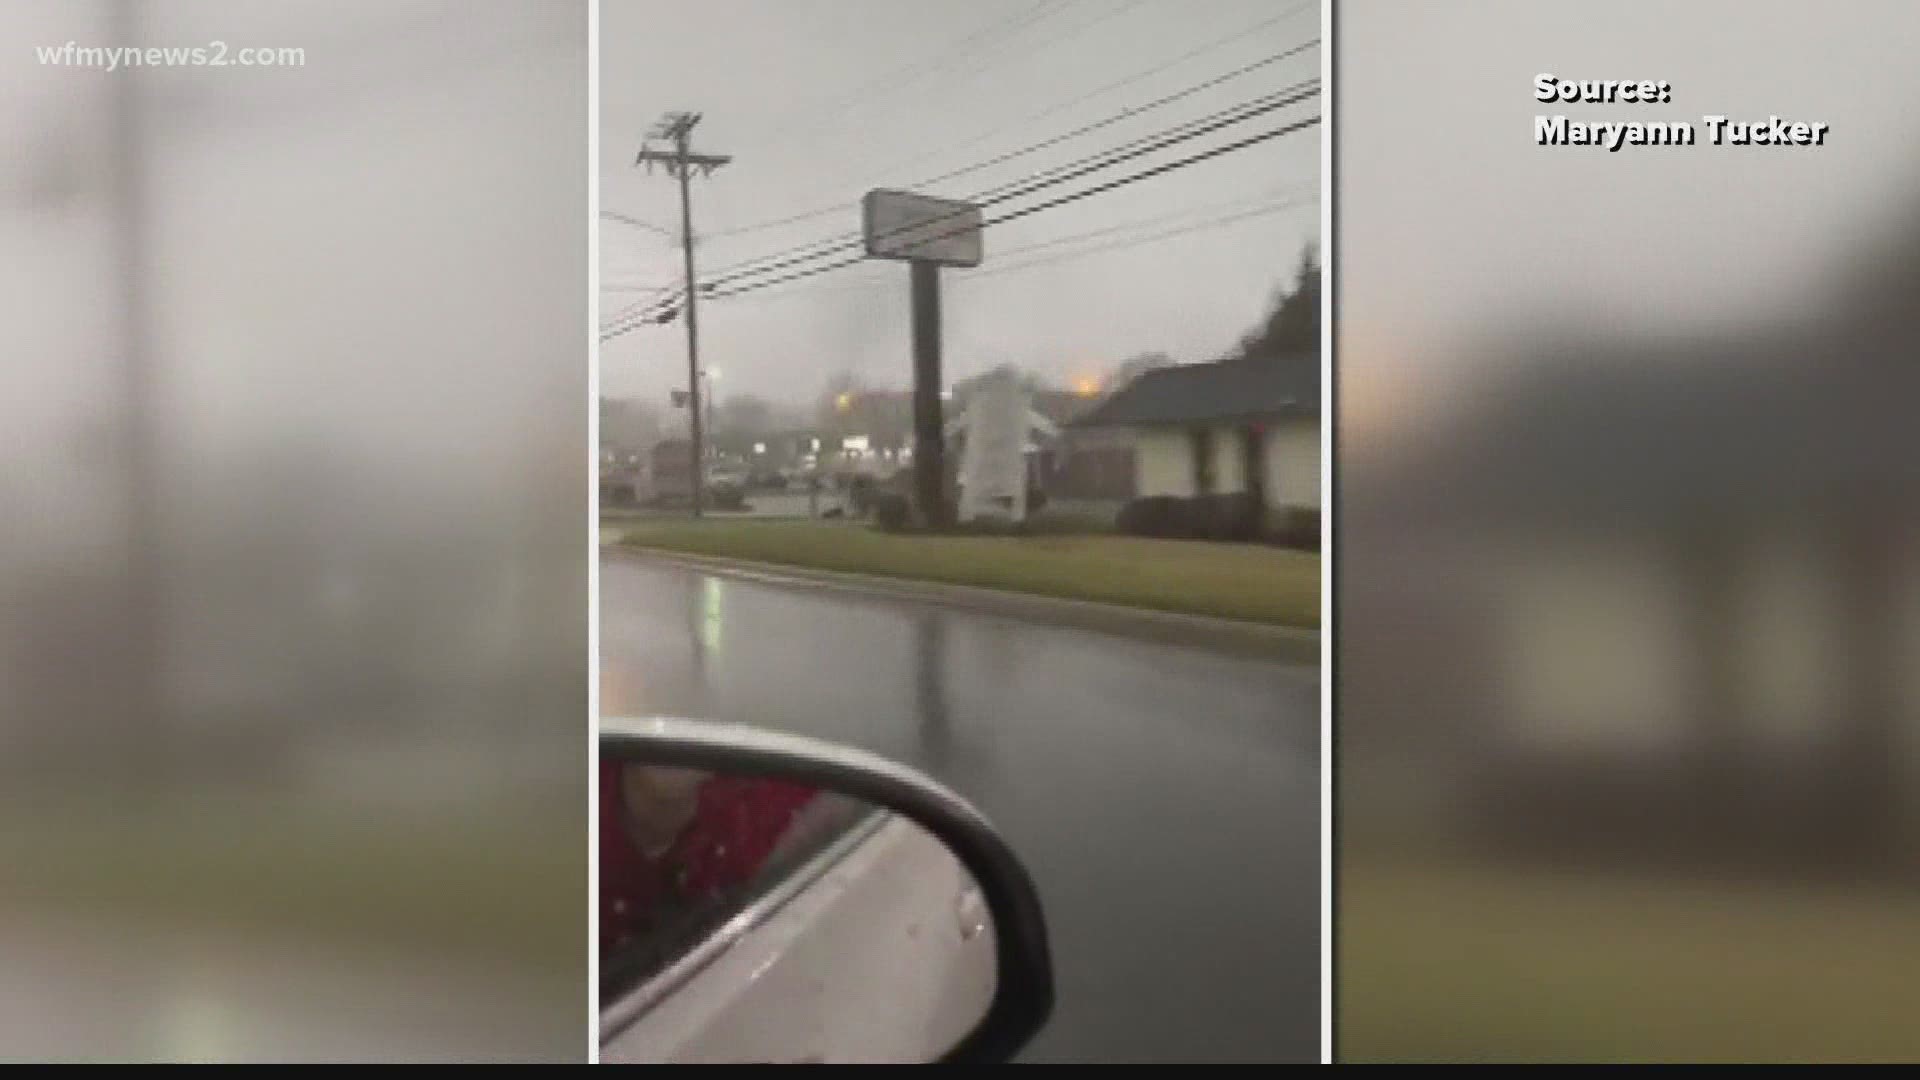 Two tornadoes touched down in the Piedmont Triad on Thursday. An Alamance County woman got video of one of them.